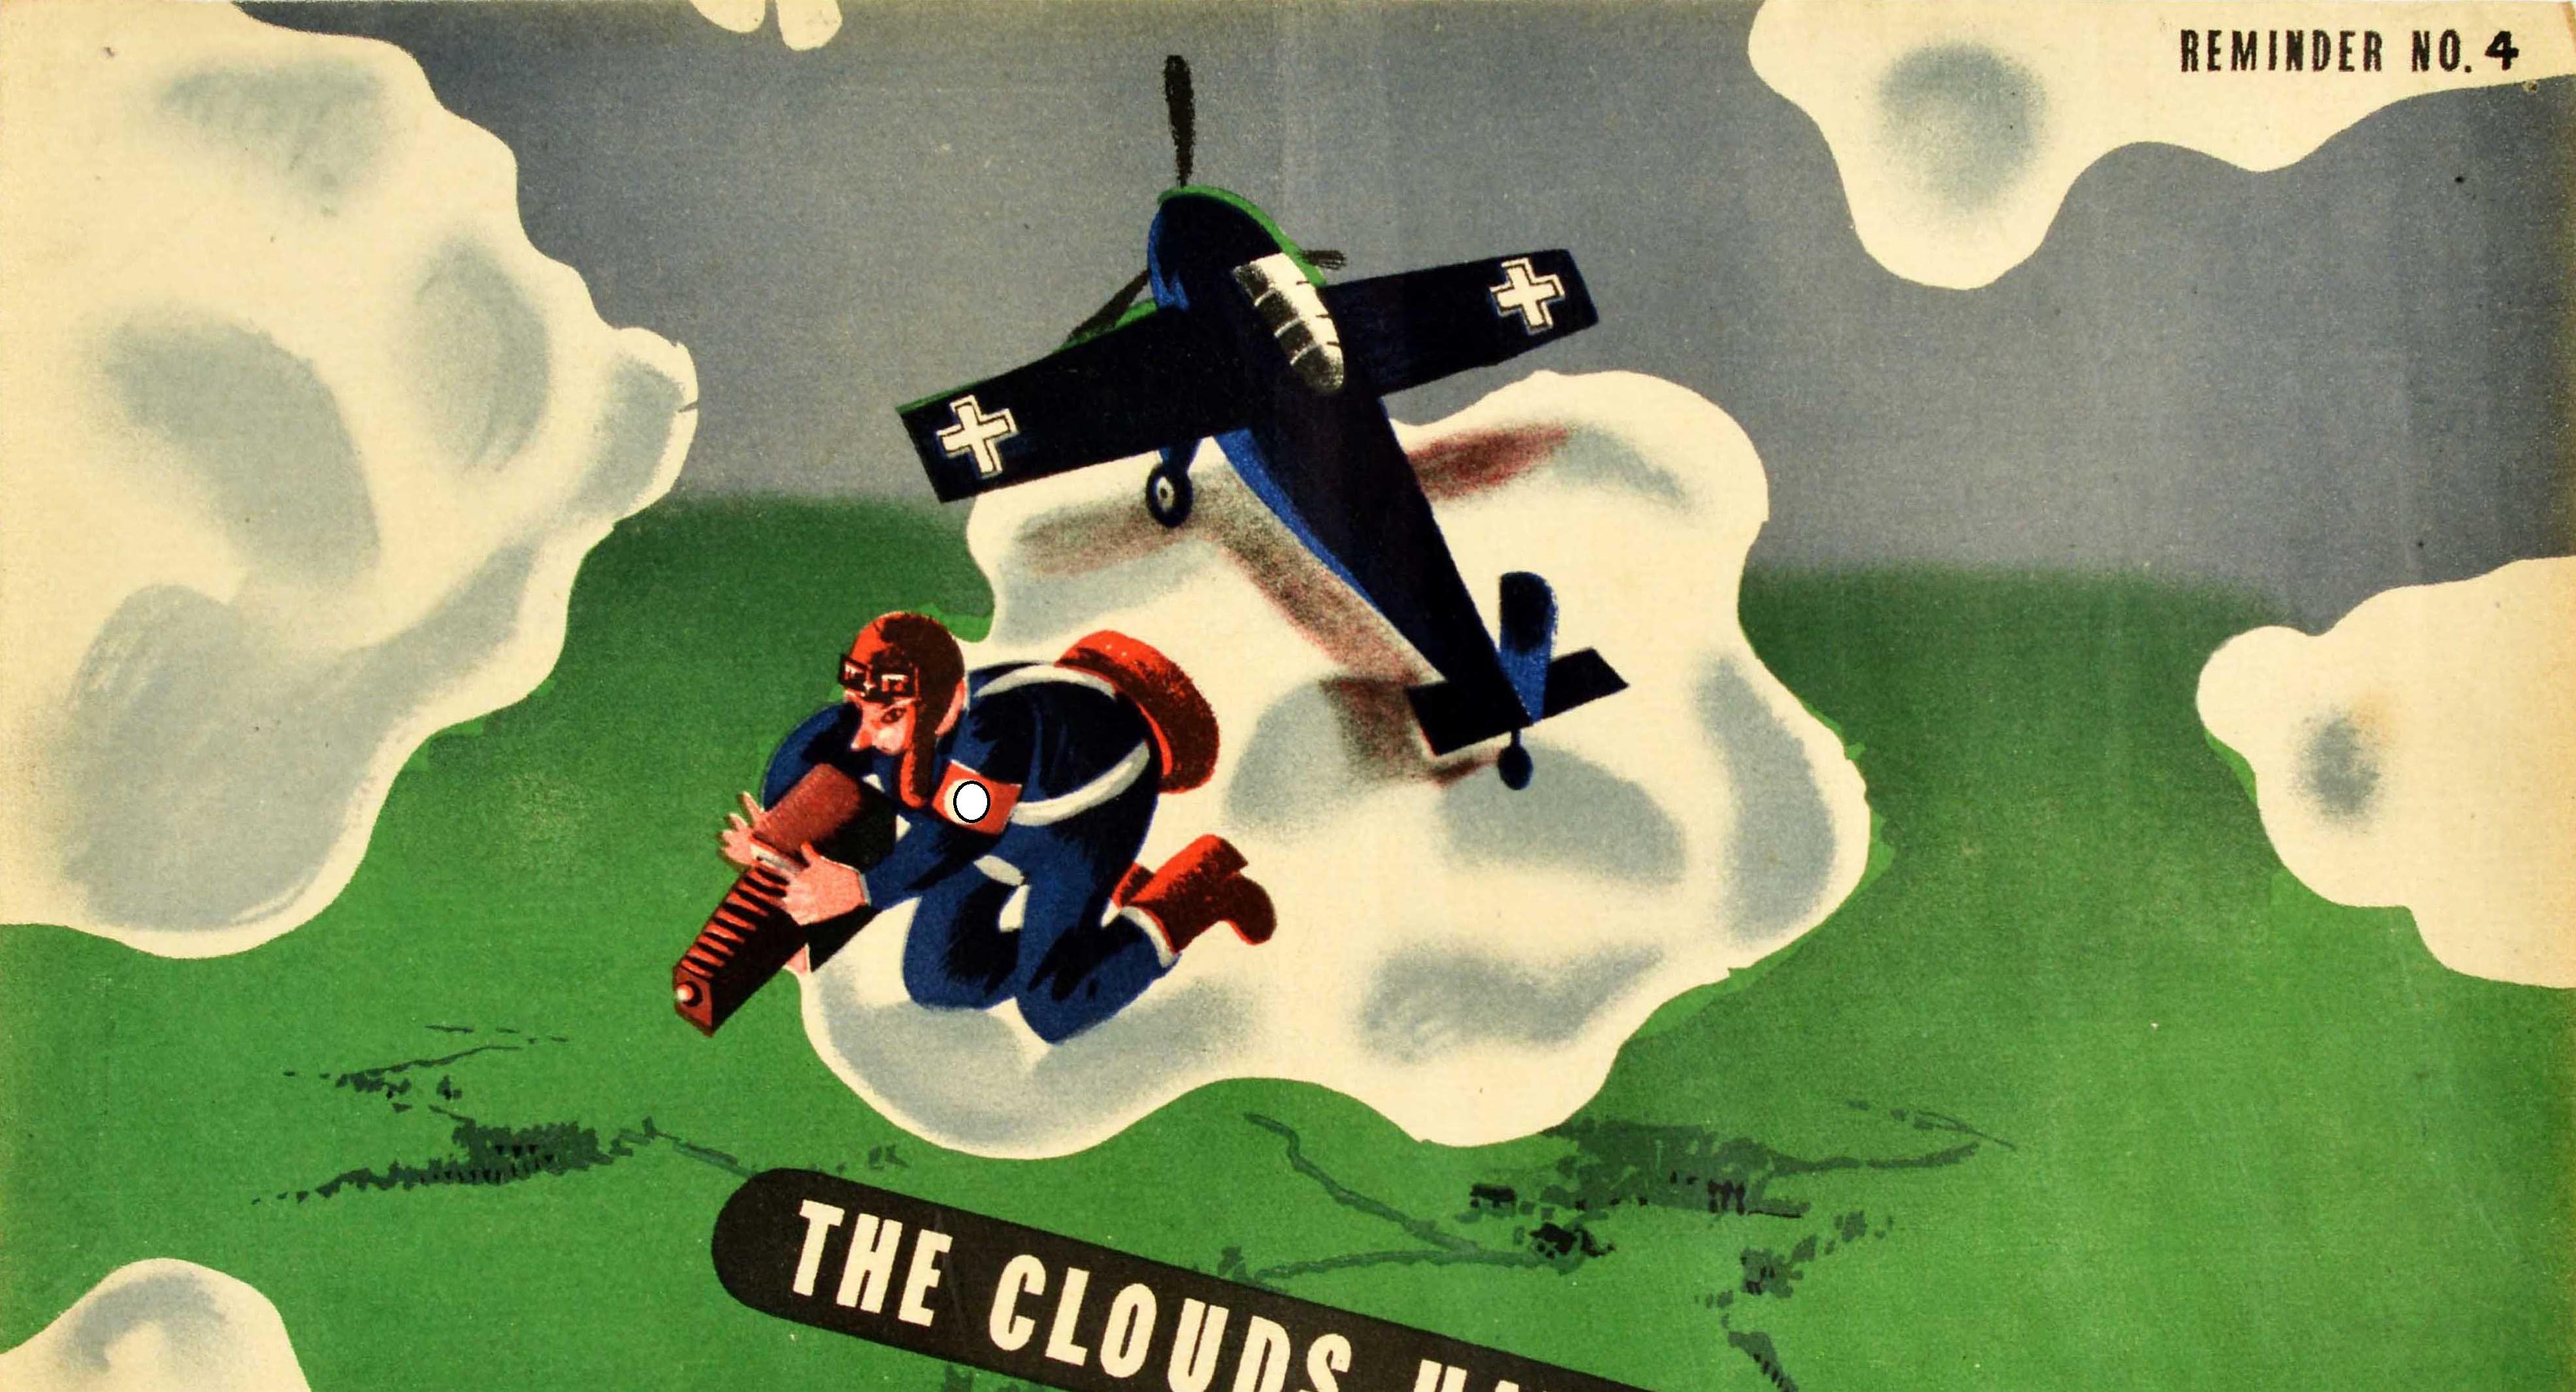 Original Vintage WWII Poster The Clouds Have Eyes War Spy Pilot Camouflage Plane - Print by Unknown